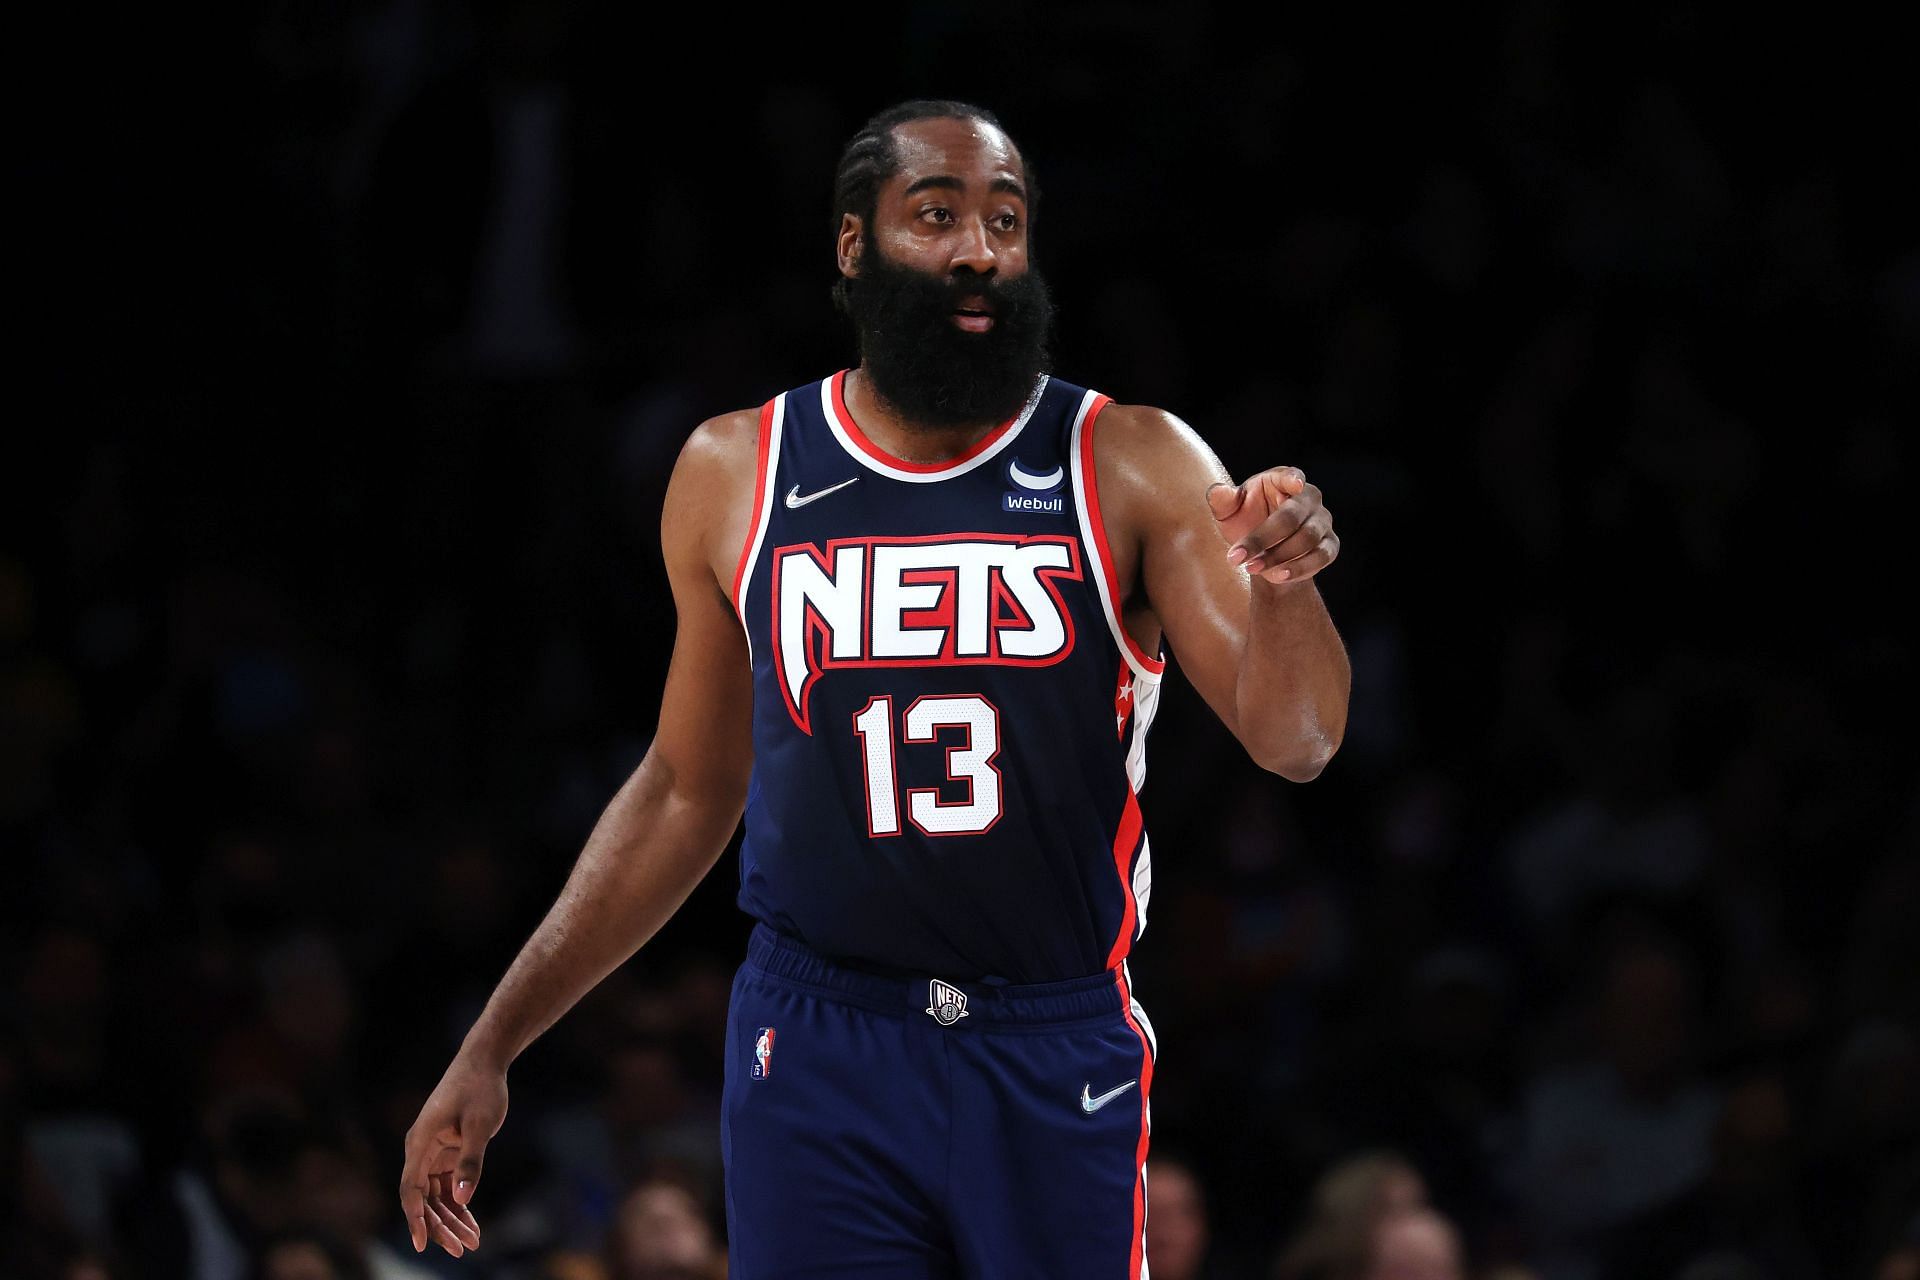 James Harden of the Brooklyn Nets looks on against the Cleveland Cavaliers during their game at Barclays Center on November 17, 2021, in New York City.